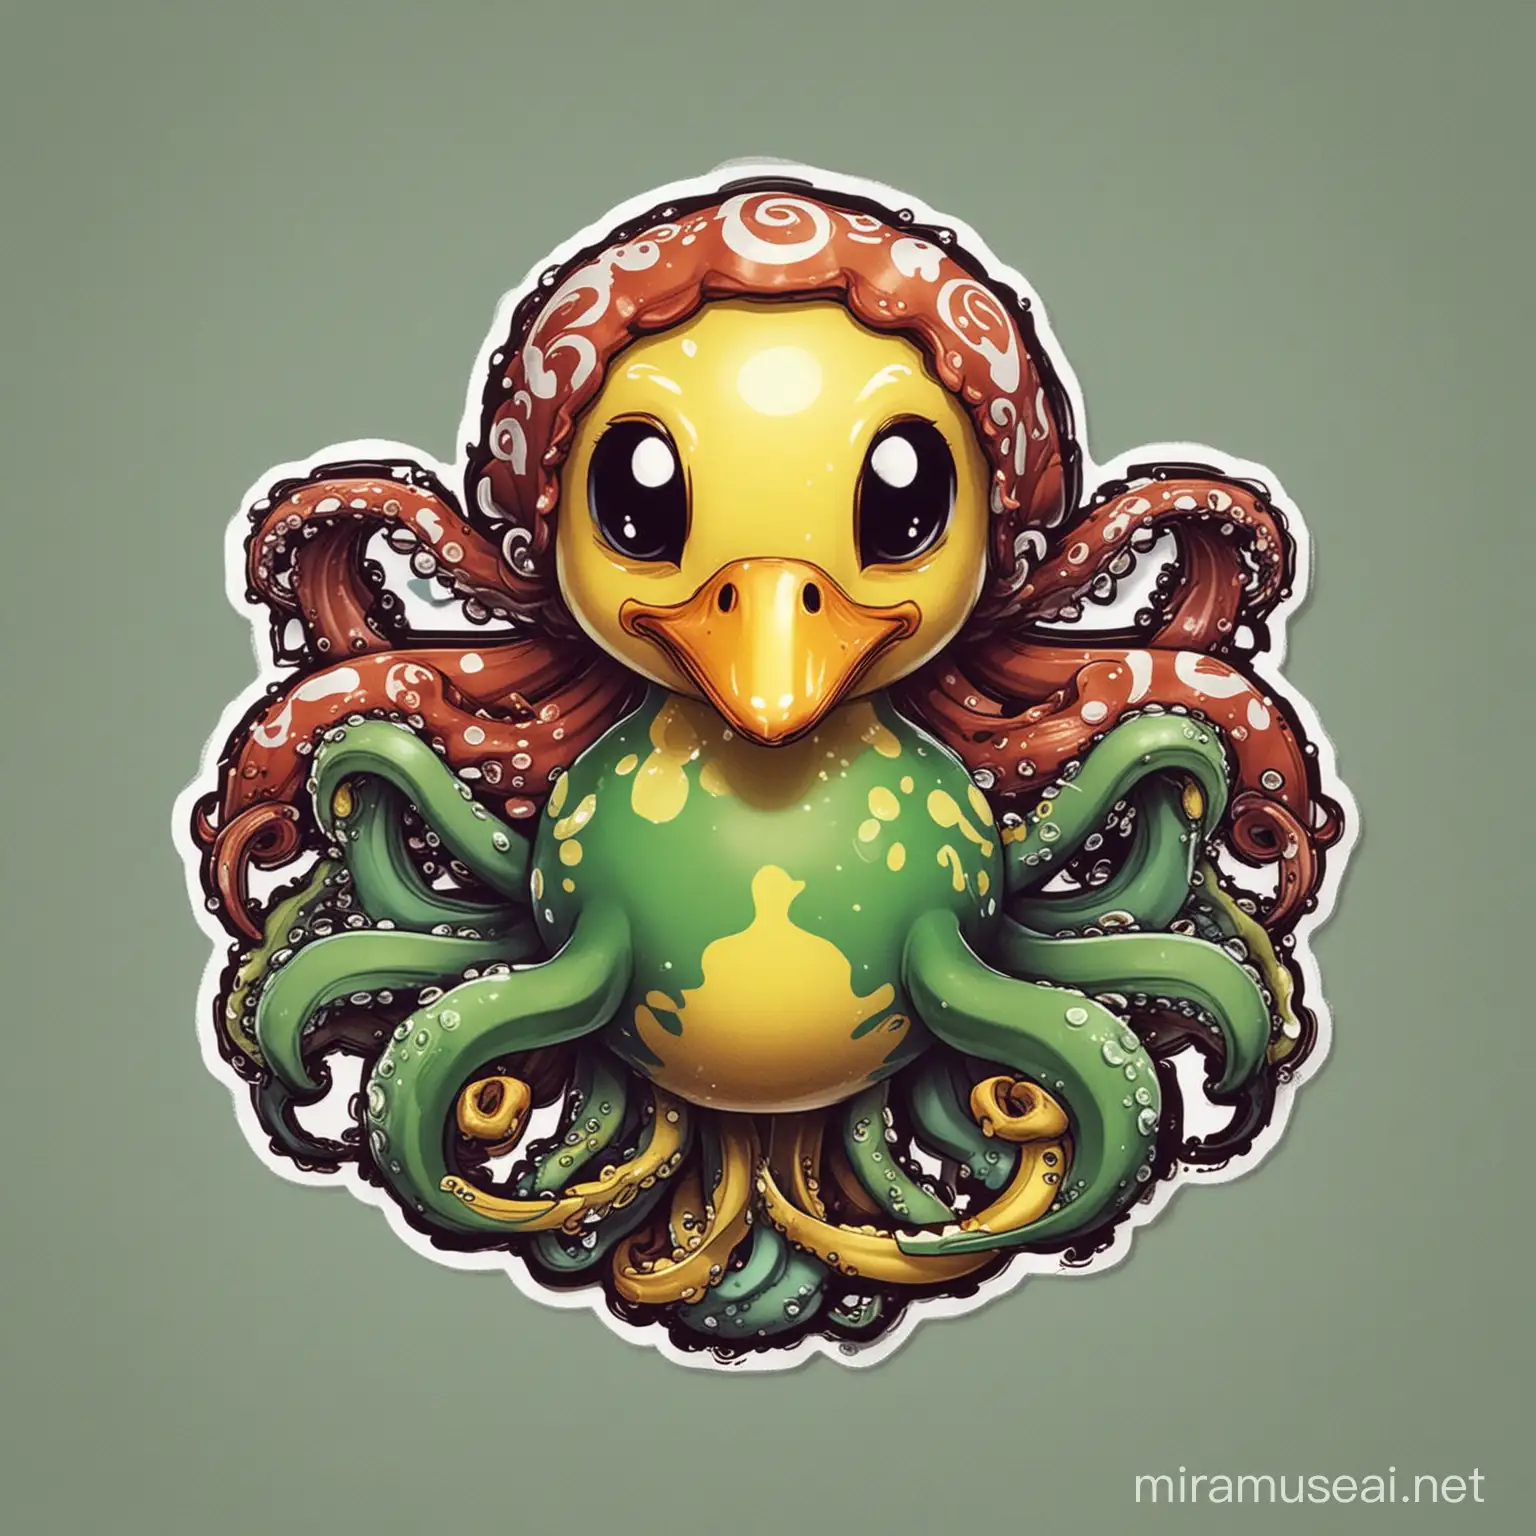 Rubber Duck Octopus Hybrid with Tentacles and Wiggly Arms in Zelda Wind Waker Style